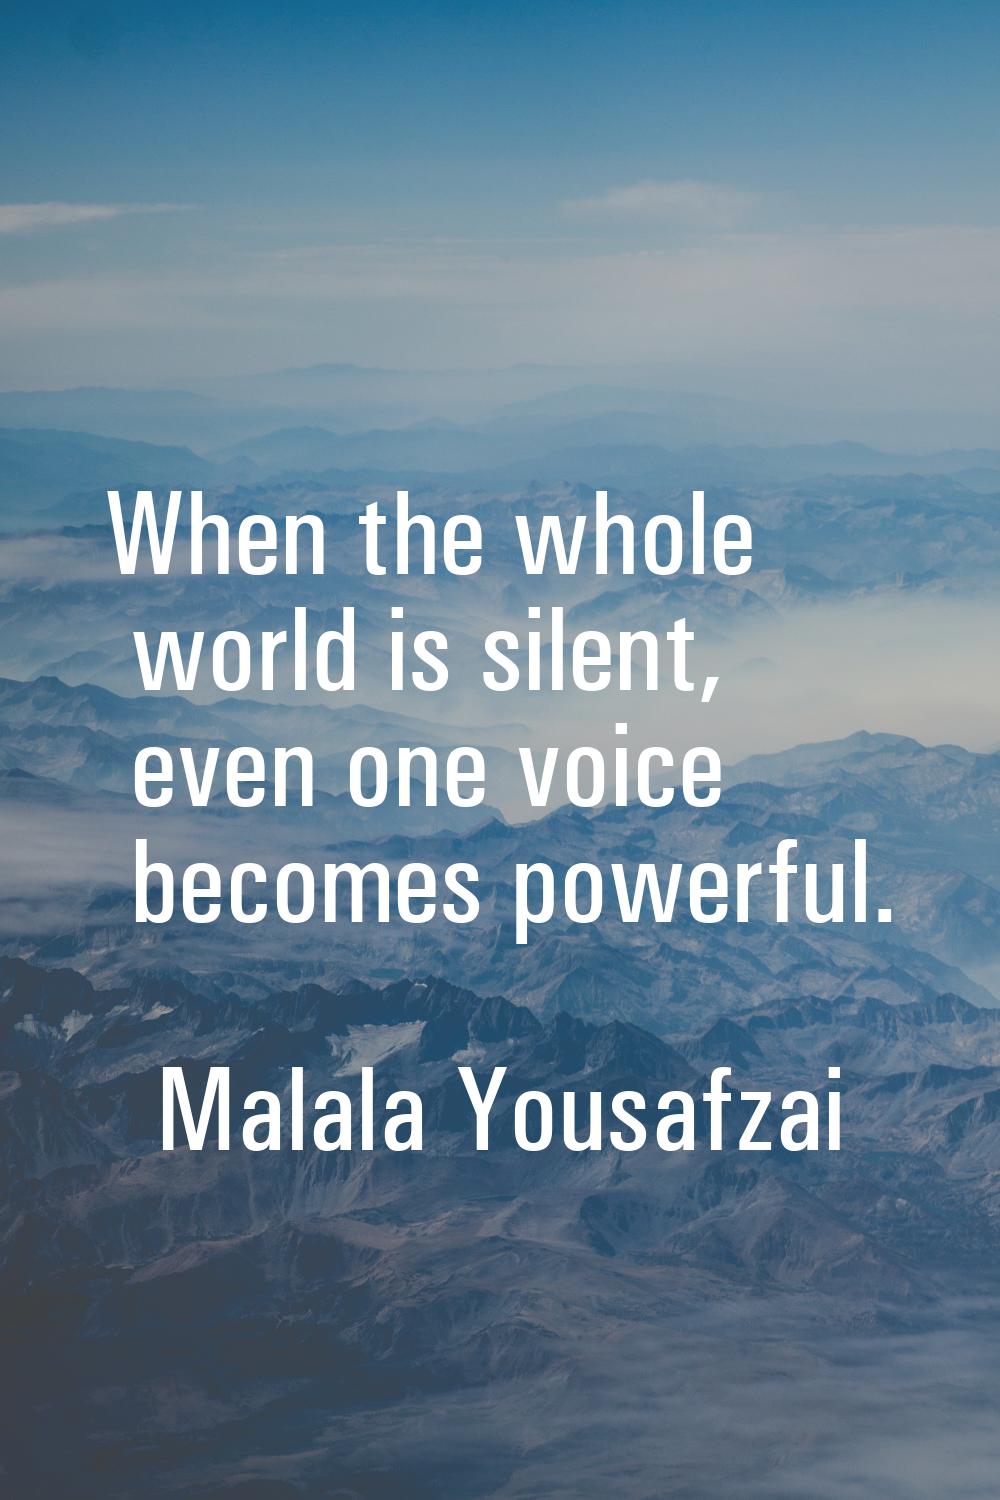 When the whole world is silent, even one voice becomes powerful.